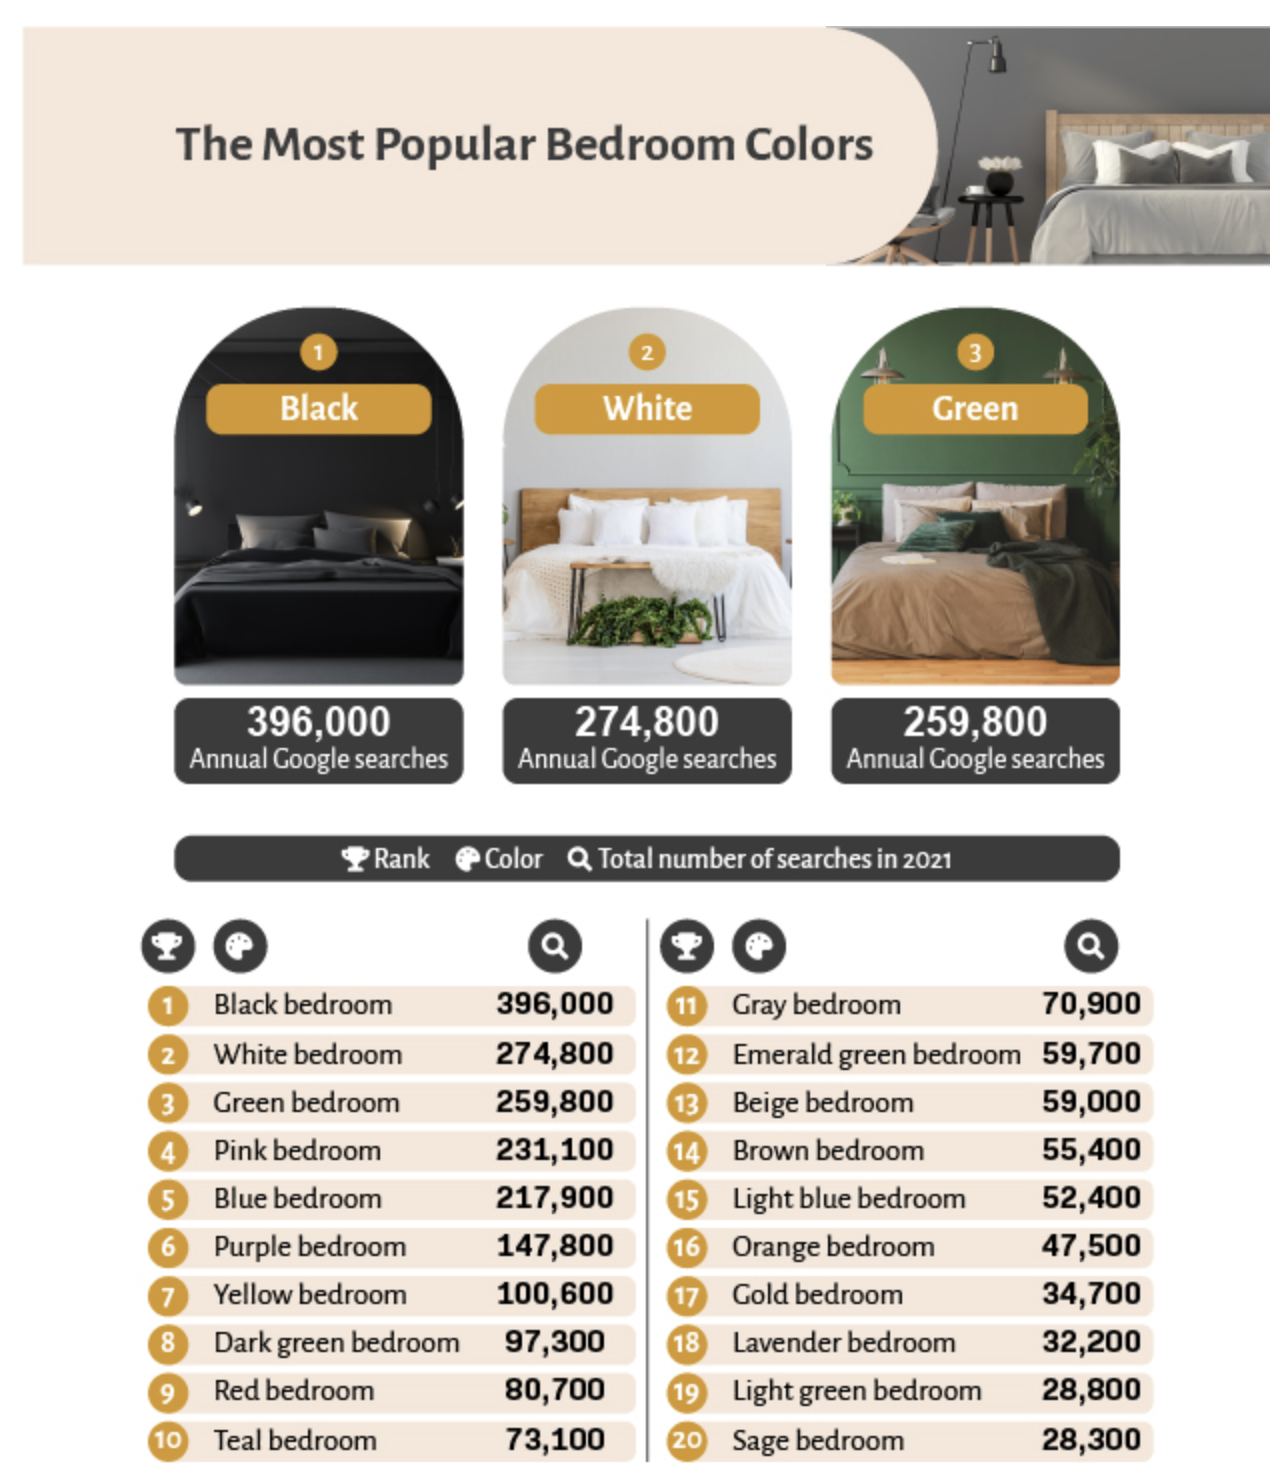 A visual list of the most popular bedroom colors, the top three being black, white, and green.